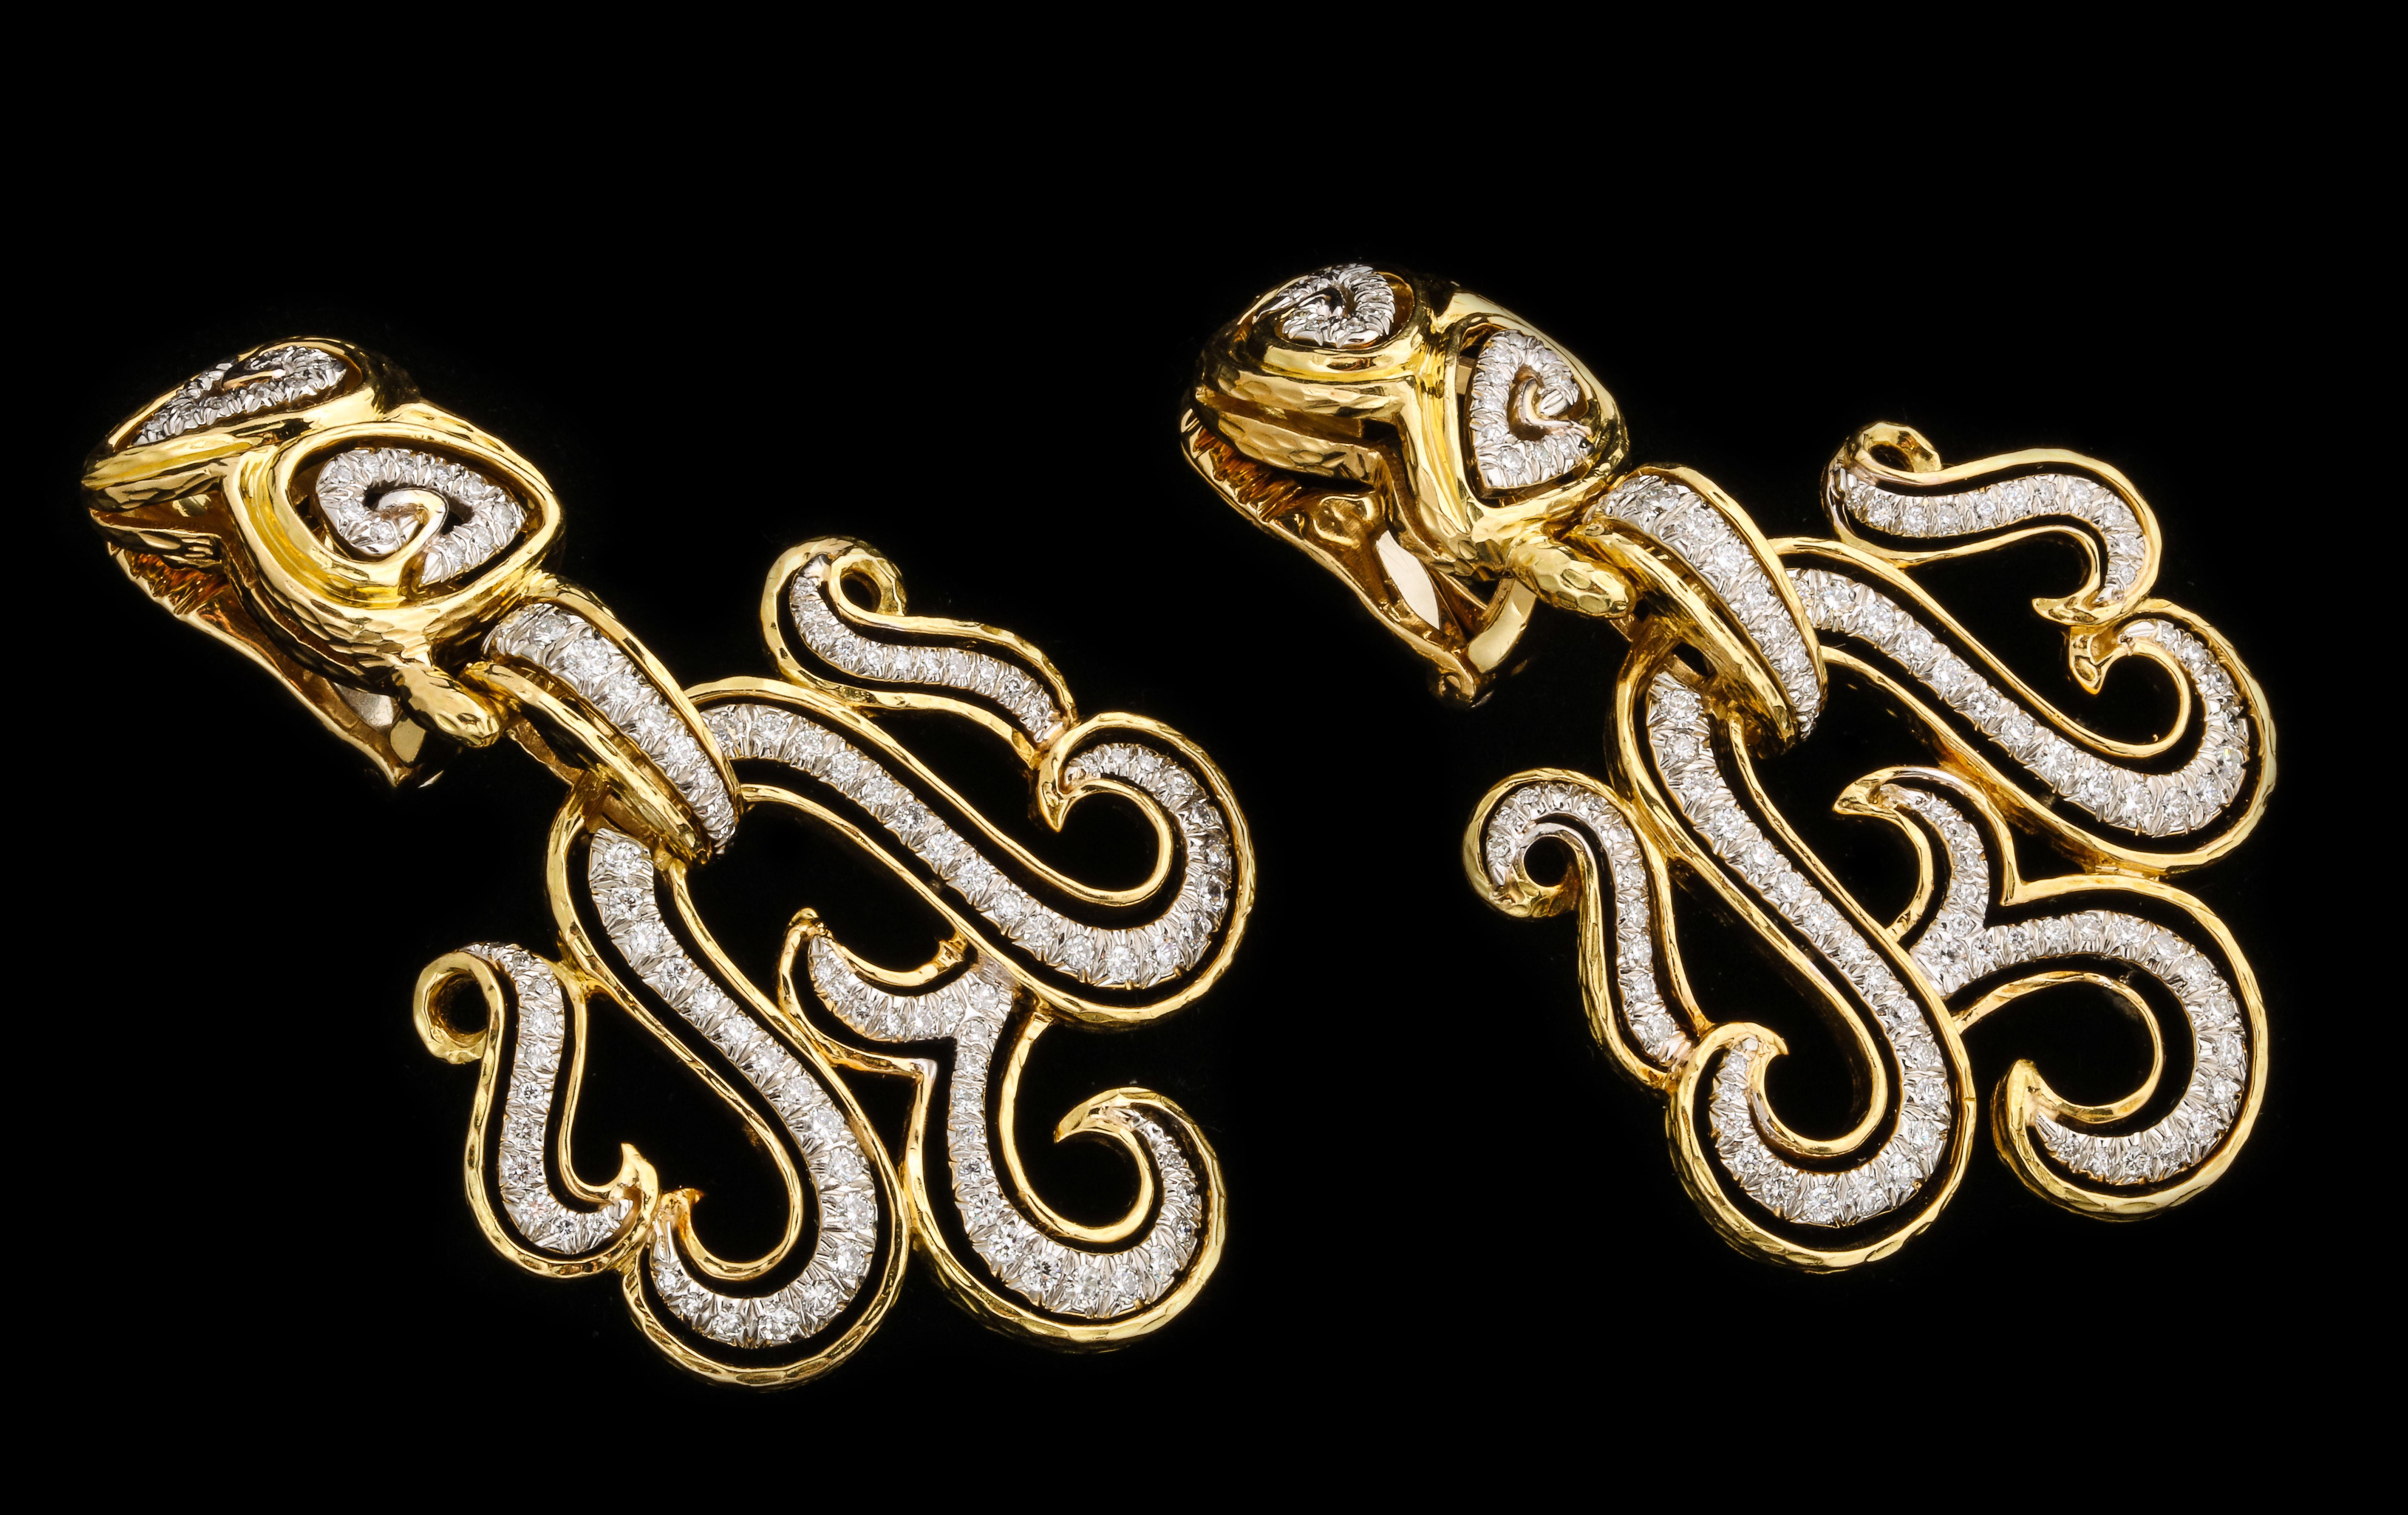 David Webb Yellow Gold and Diamond Earrings

Signed David Webb

18k Yellow Gold

Dimensions: approximately 2.25 inches long


